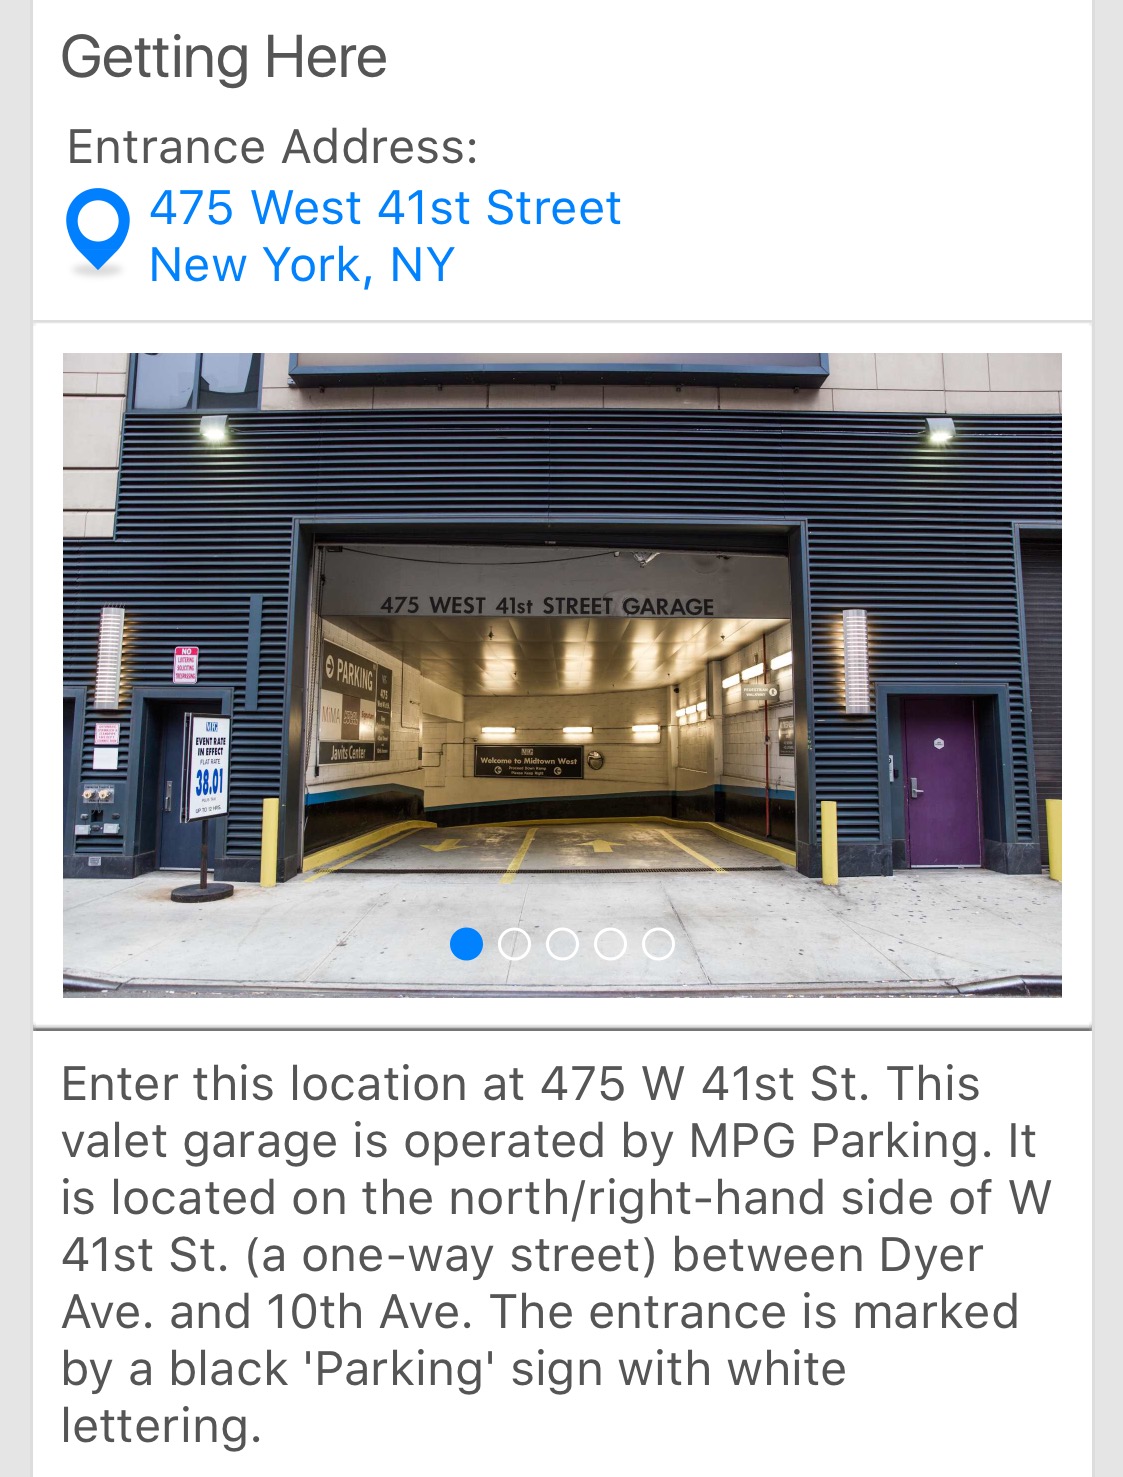 Parking, Garages And Car Spaces For Rent - Valet Parking Garage Spot Near Yotel New York Hotel